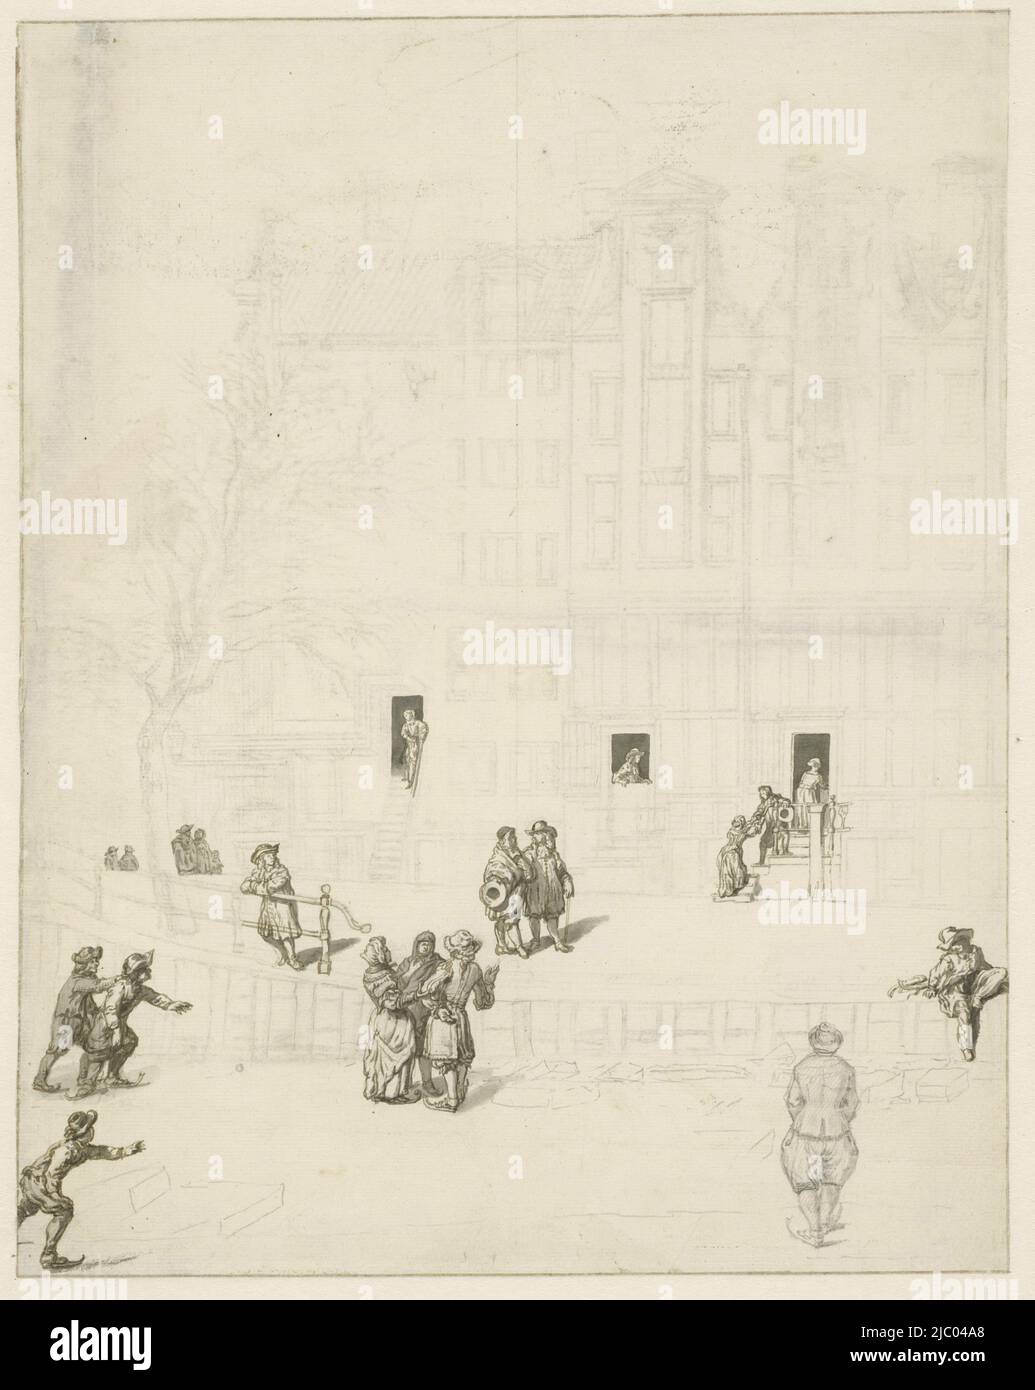 Figures on the ice from near the burned out house on Leidsegracht, 1684, Jan van der Heyden, after 1684 - 1690, Study for the figures on the ice of the frozen canal in front of the ruin of a house on Leidsegracht after the fire on January 12, 1684. Design for the illustration in Jan van der Heyden's Book of Fire Sprays, 1690 and 1735., draughtsman: Jan van der Heyden, Amsterdam, after 12-Jan-1684 - 1690, paper, brush, counterproof, h 315 mm × w 246 mm Stock Photo